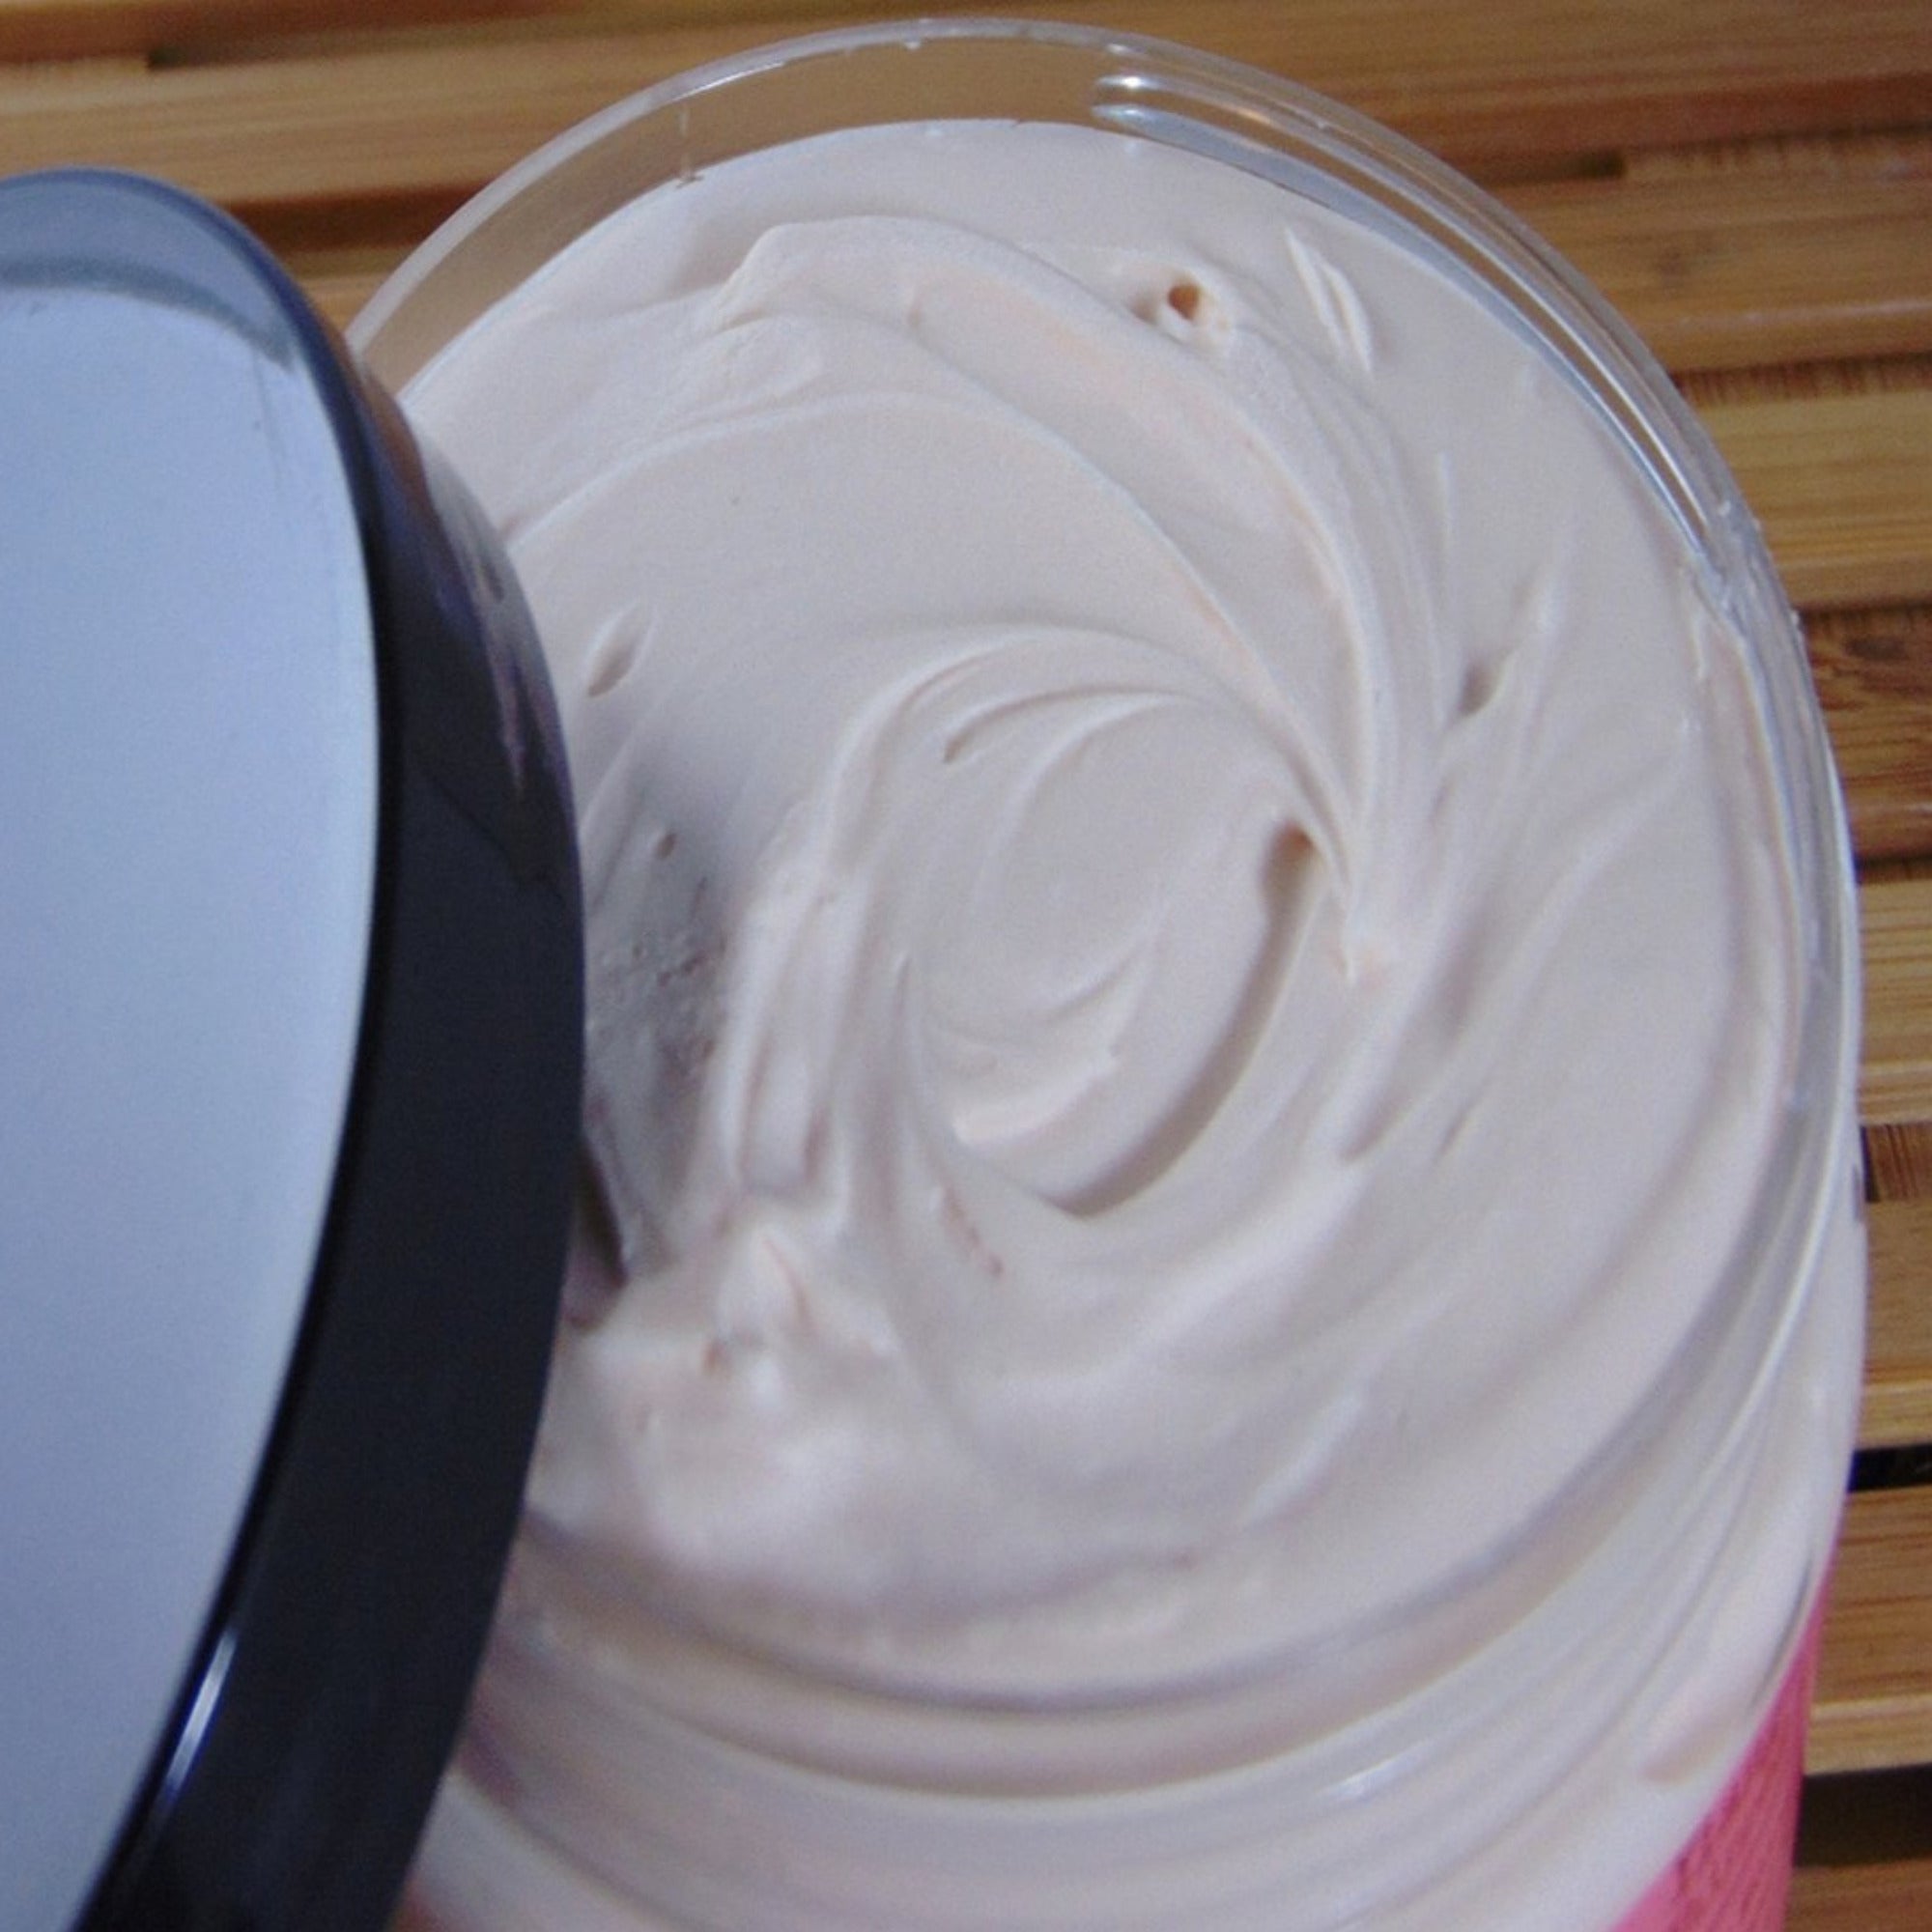 Whipped Body Butter Ylang Ylang Patchouli 3 oz topn view